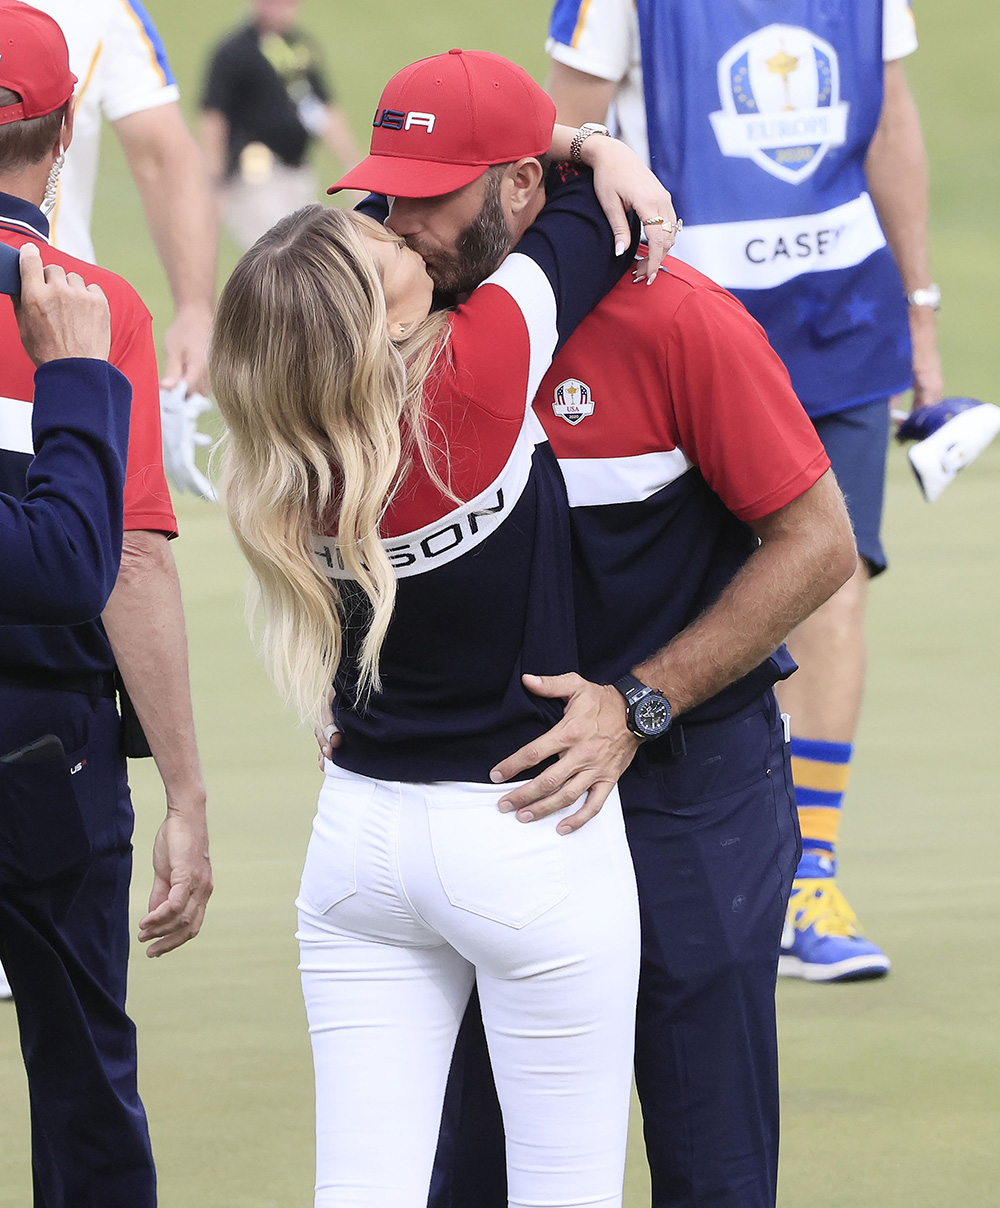 Paulina Gretzky and Dustin Johnson Get Married After 8-Year Engagement